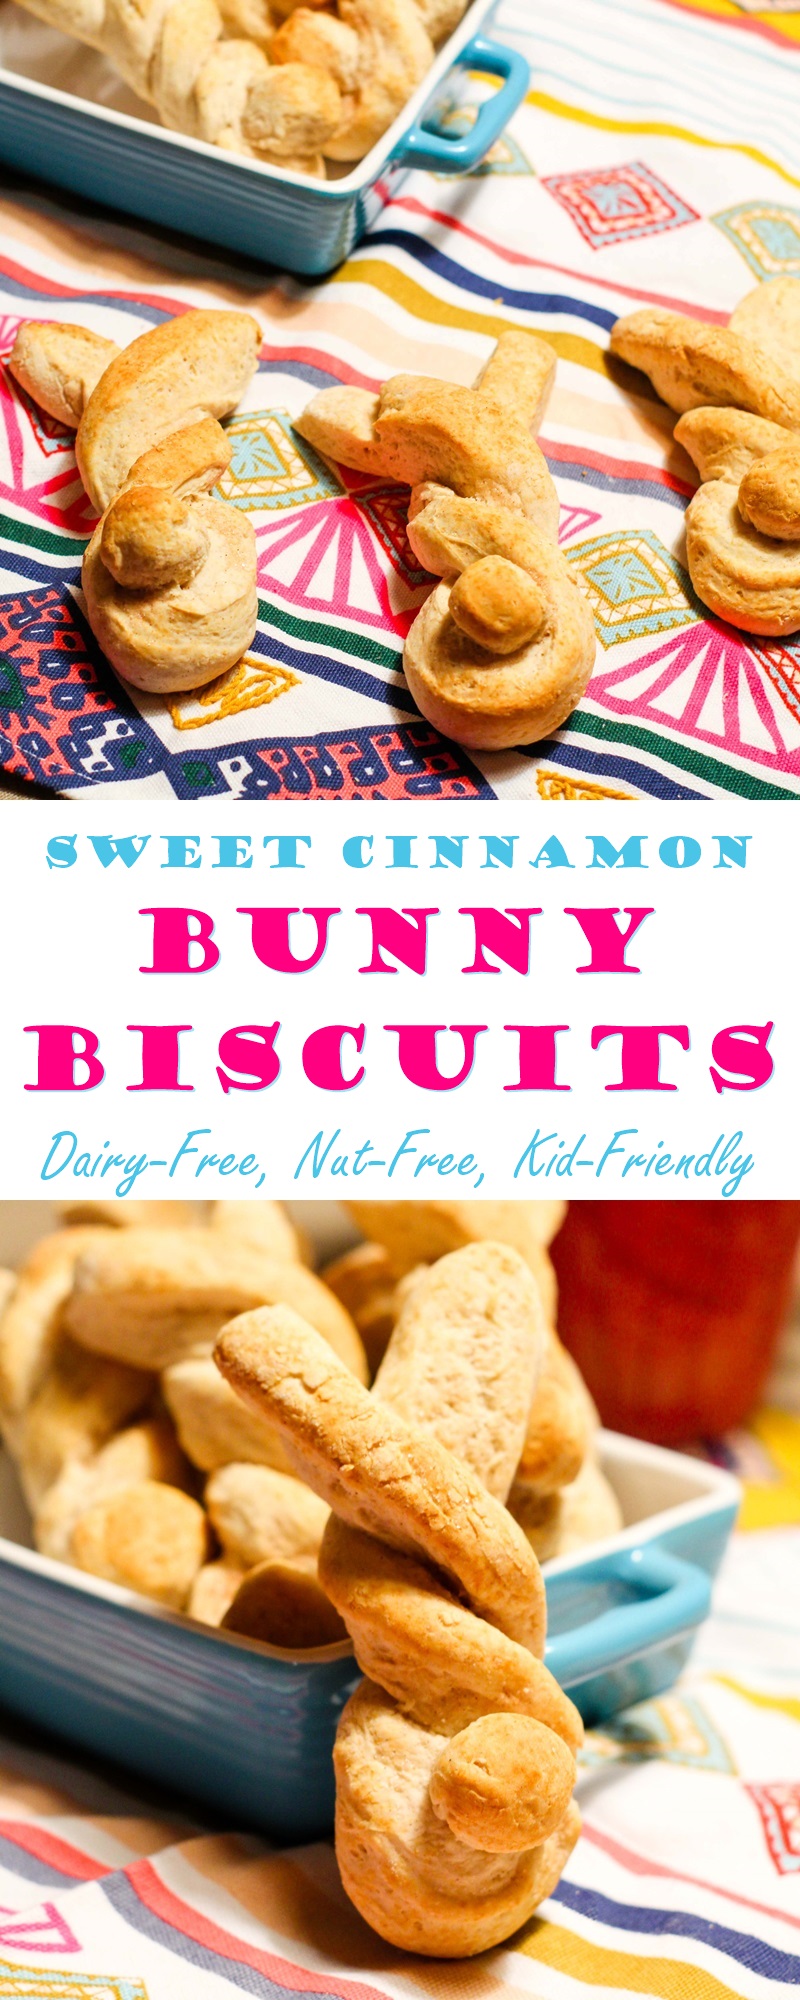 Bunny Biscuits! A Sweet Cinnamon Recipe (with Savory option) - Dairy-free, Nut-free, Vegan, Easter or Spring Treat